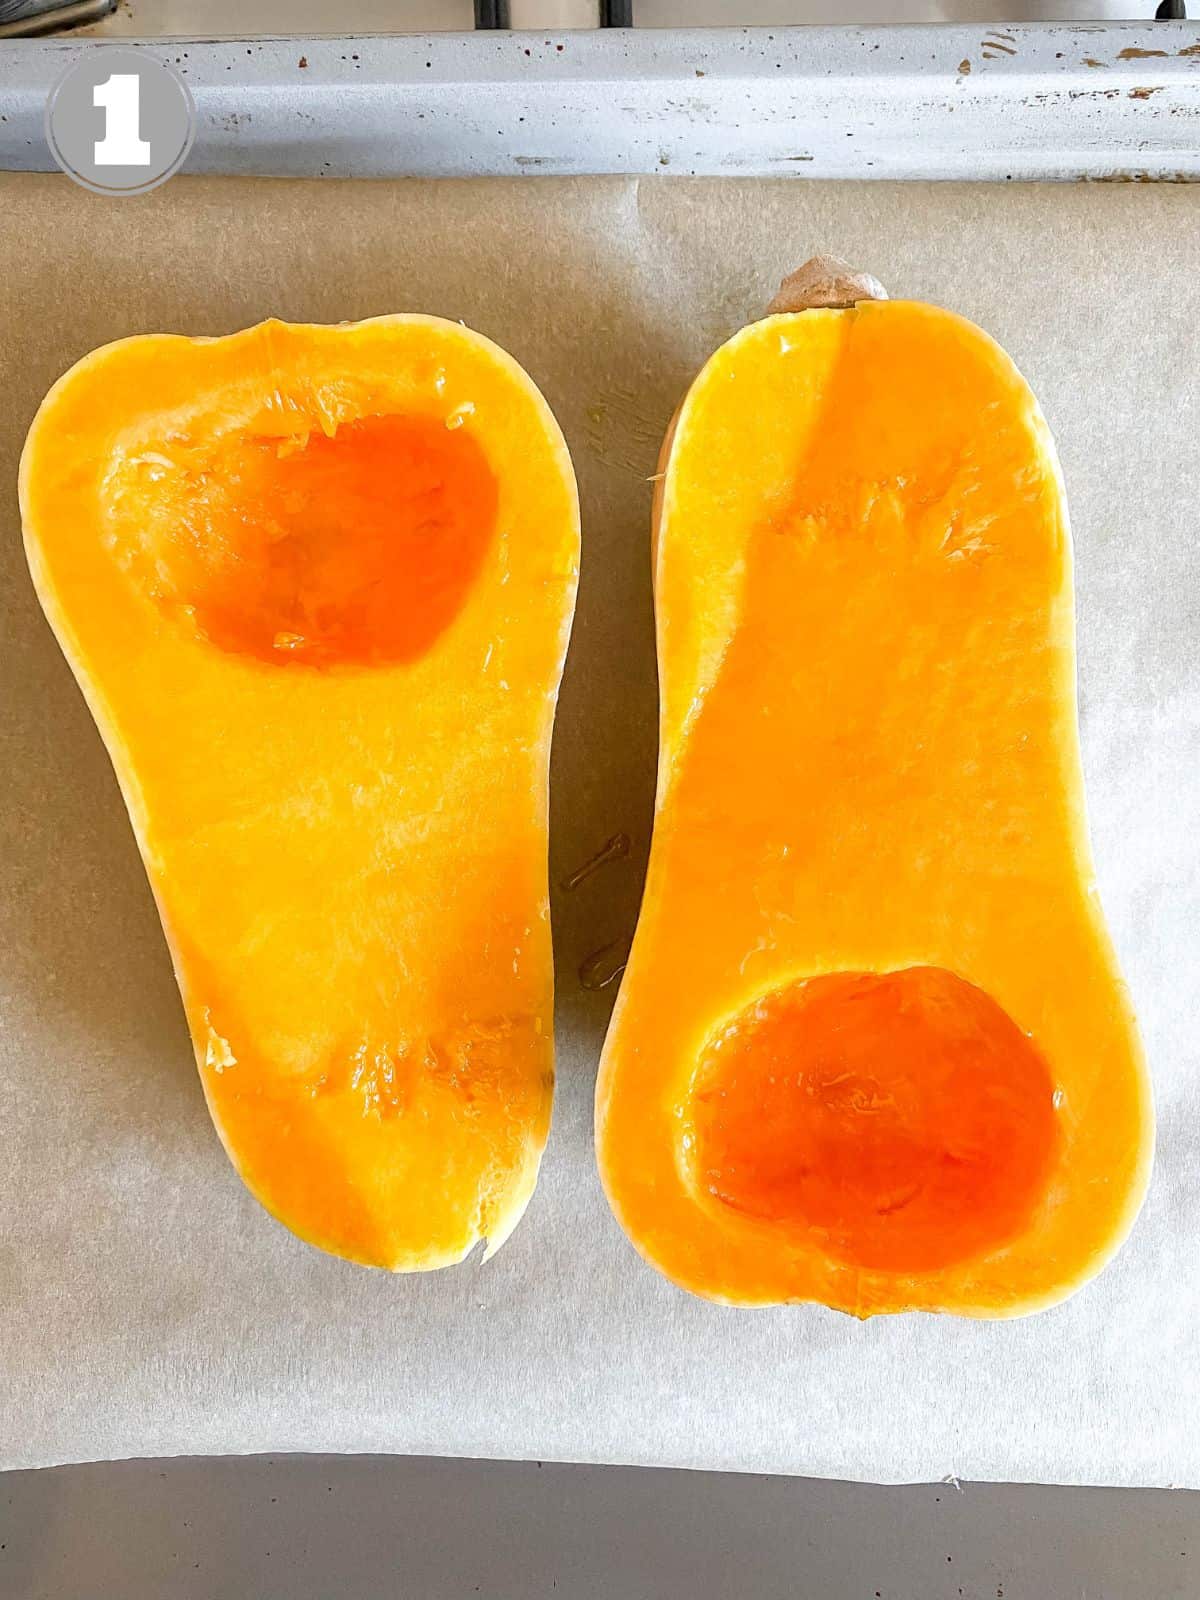 butternut squash halves on a lined baking tray.